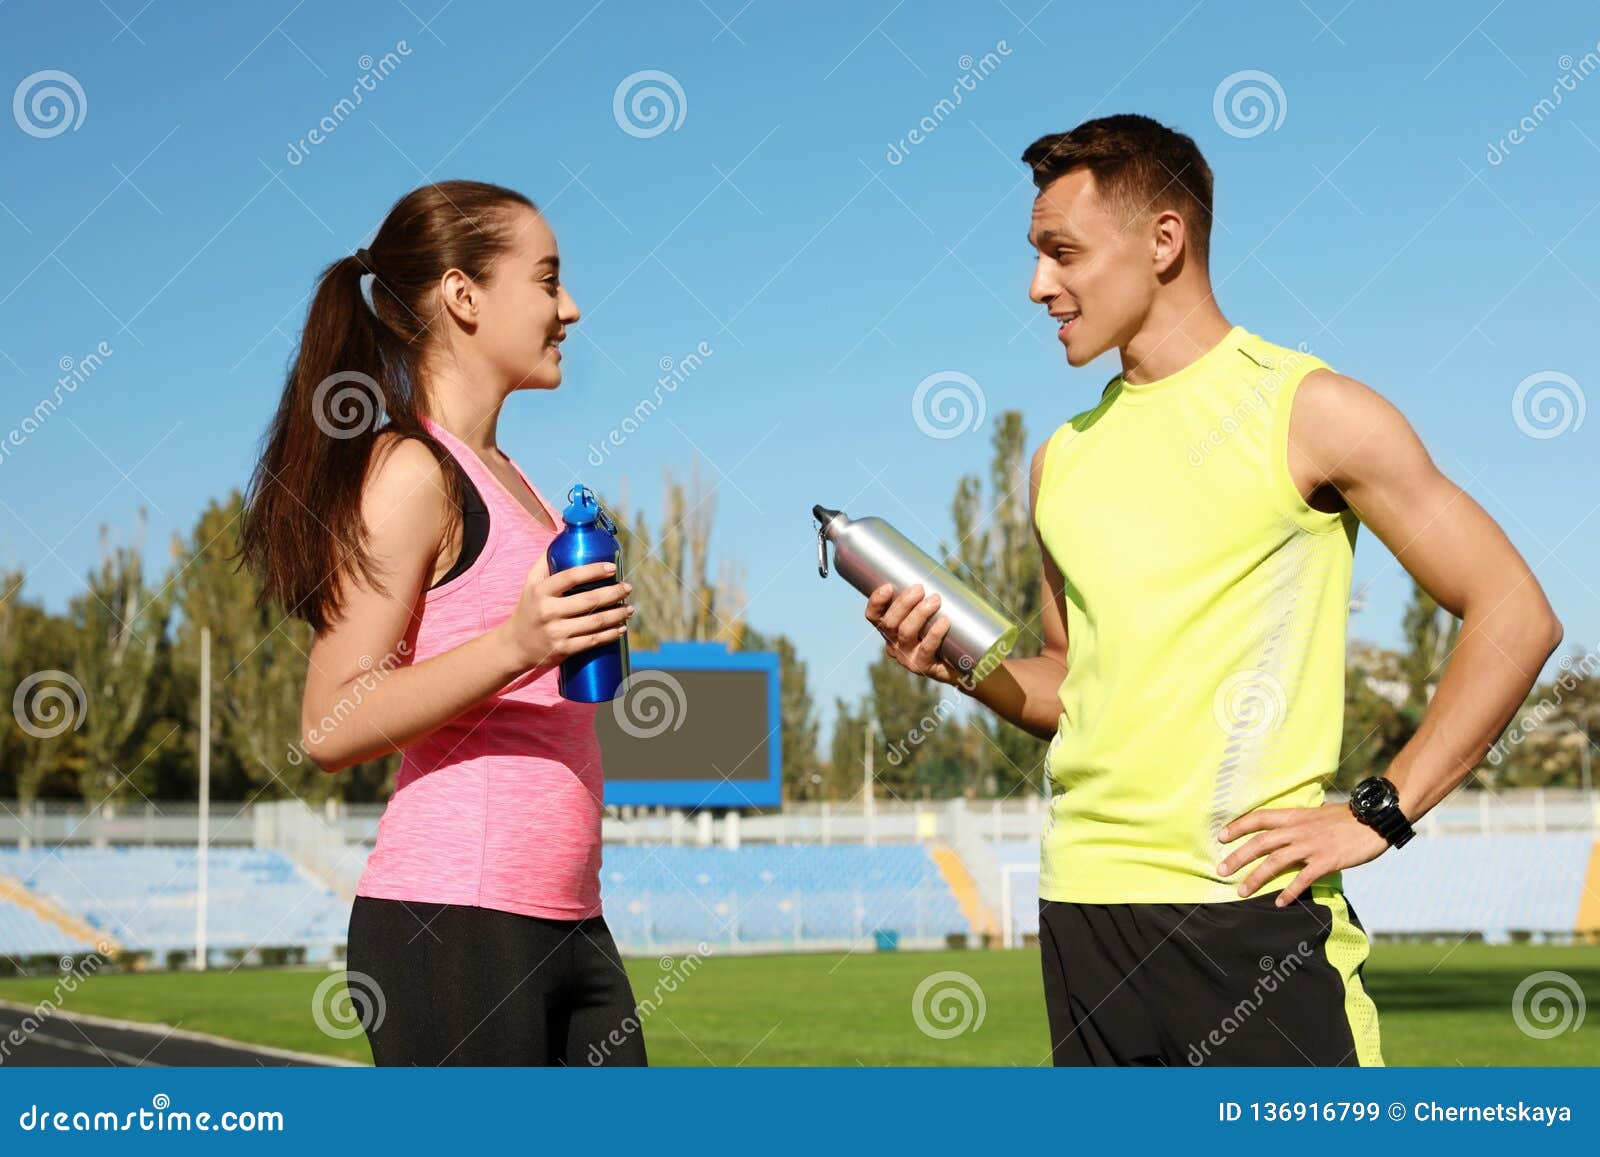 Young Sporty Couple Holding Bottles Of Water At Stadium Stock Image Image Of Drink Bottle